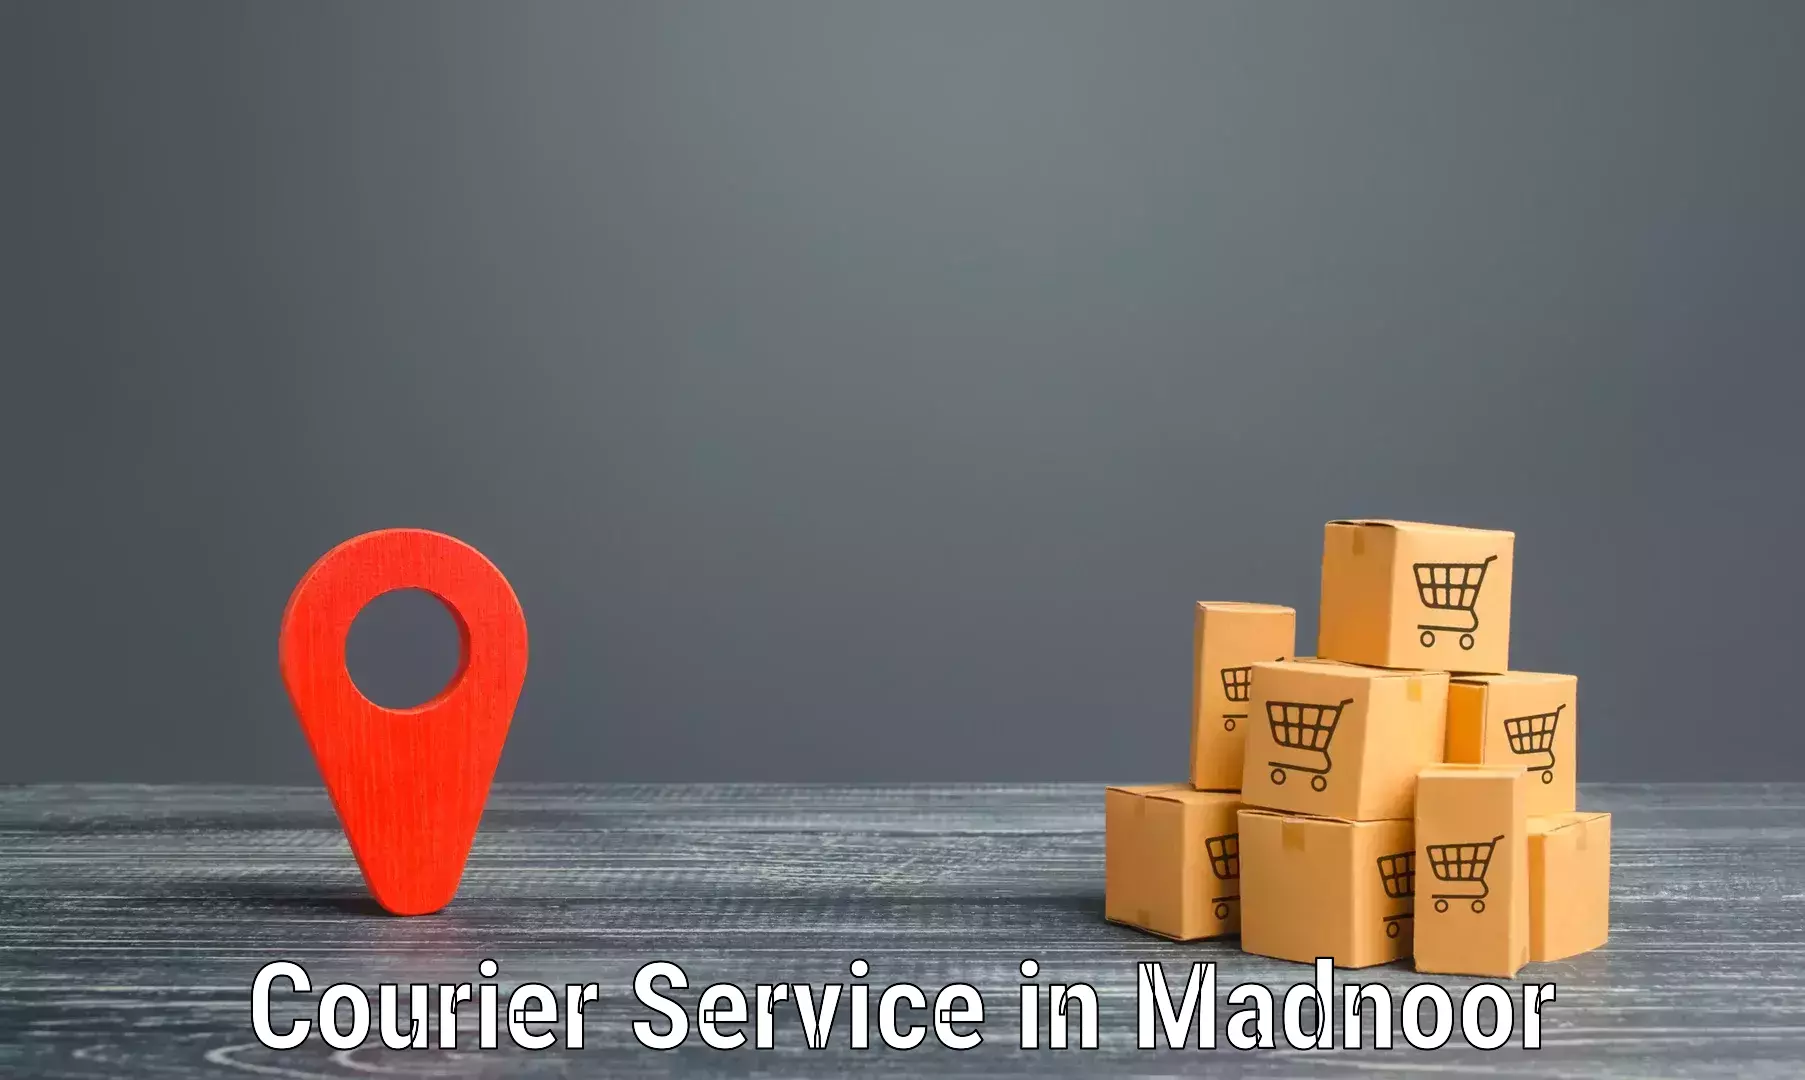 Customer-oriented courier services in Madnoor